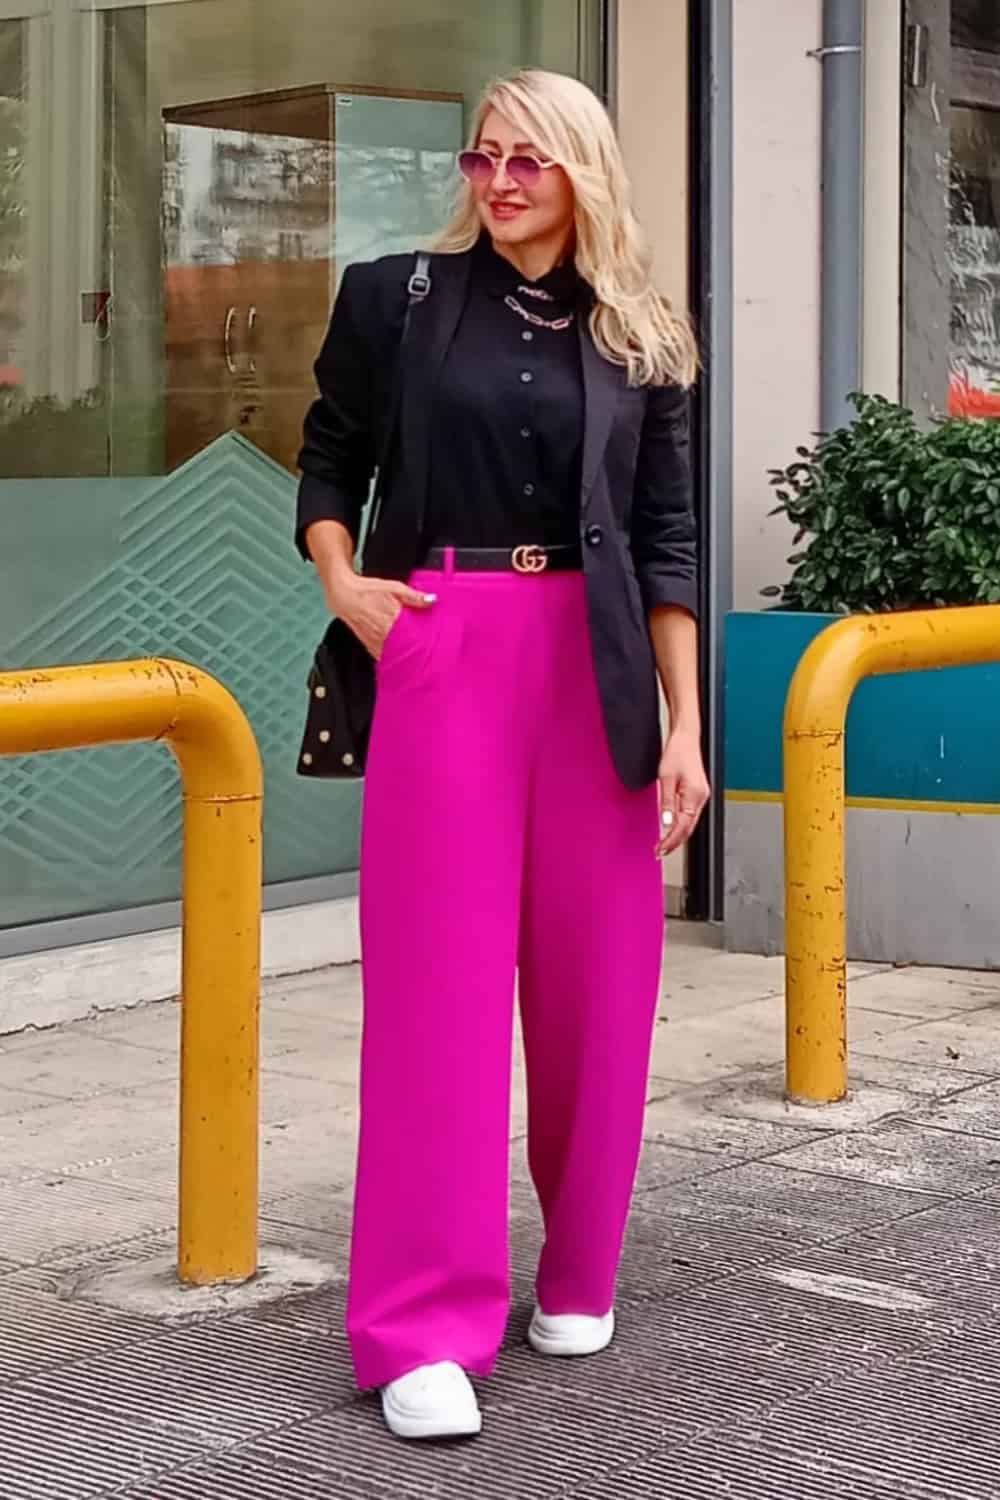 Classy Fuchsia Pants with black blazer outfit